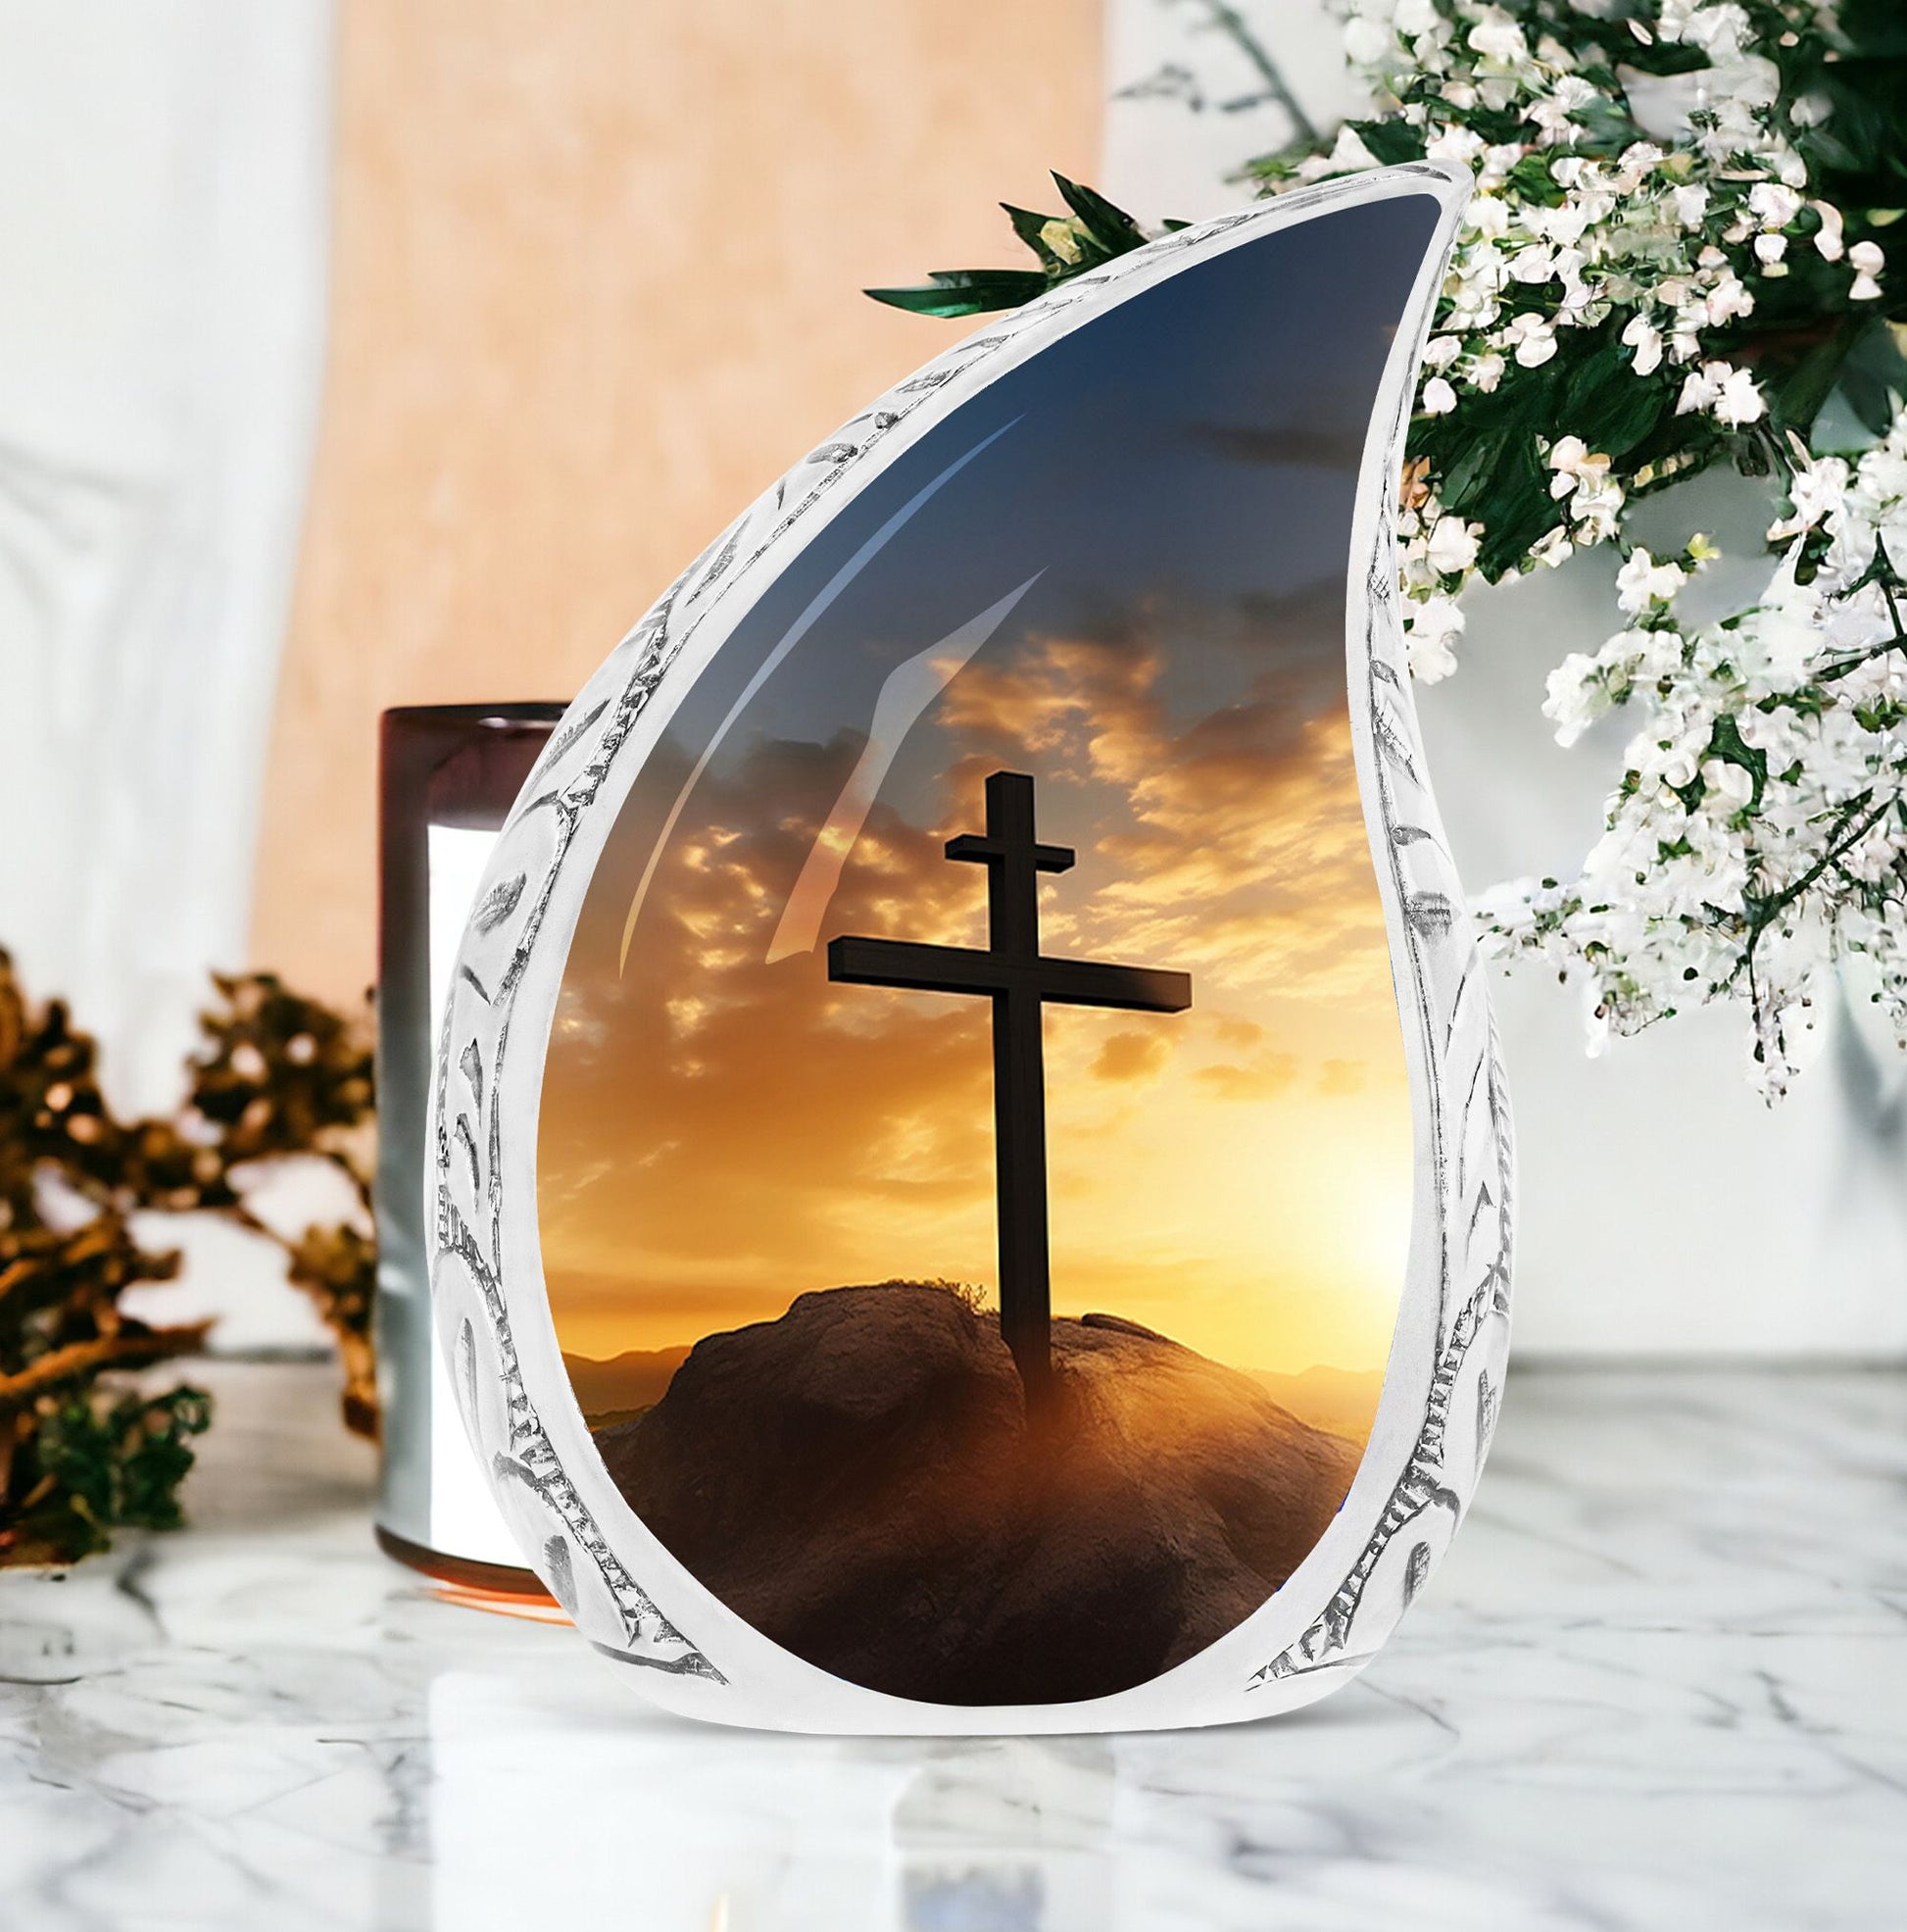 Large Christ-themed urn for ashes depicting a sunset sky, ideal for adult human ashes storage